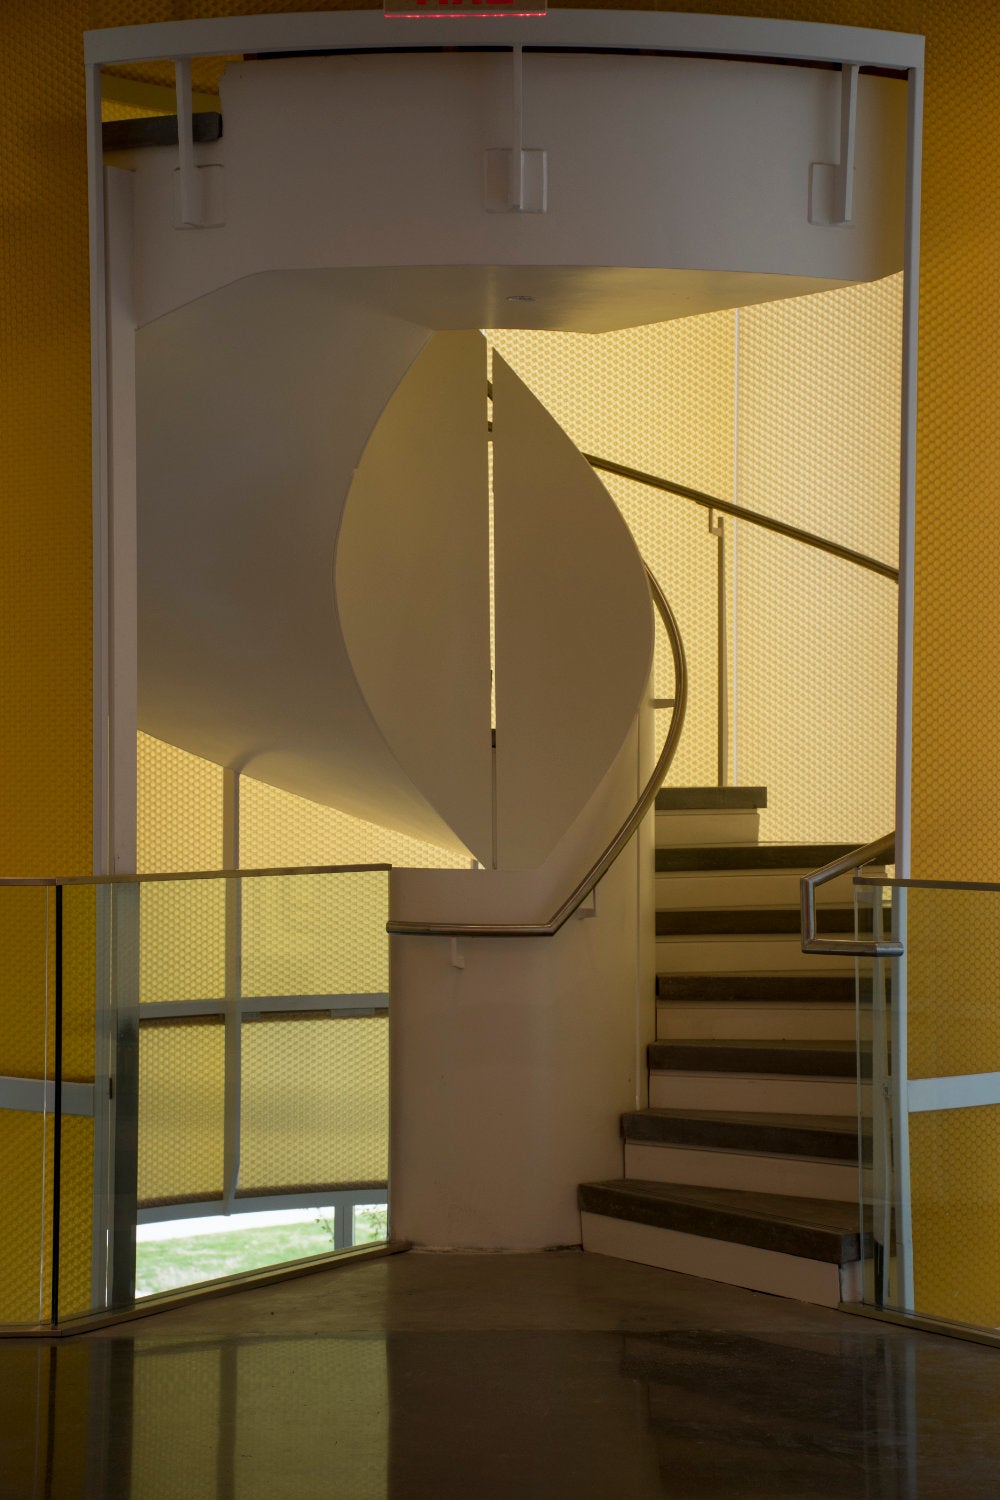 Spiral staircase in the Fascitelli Center for Advanced Engineering